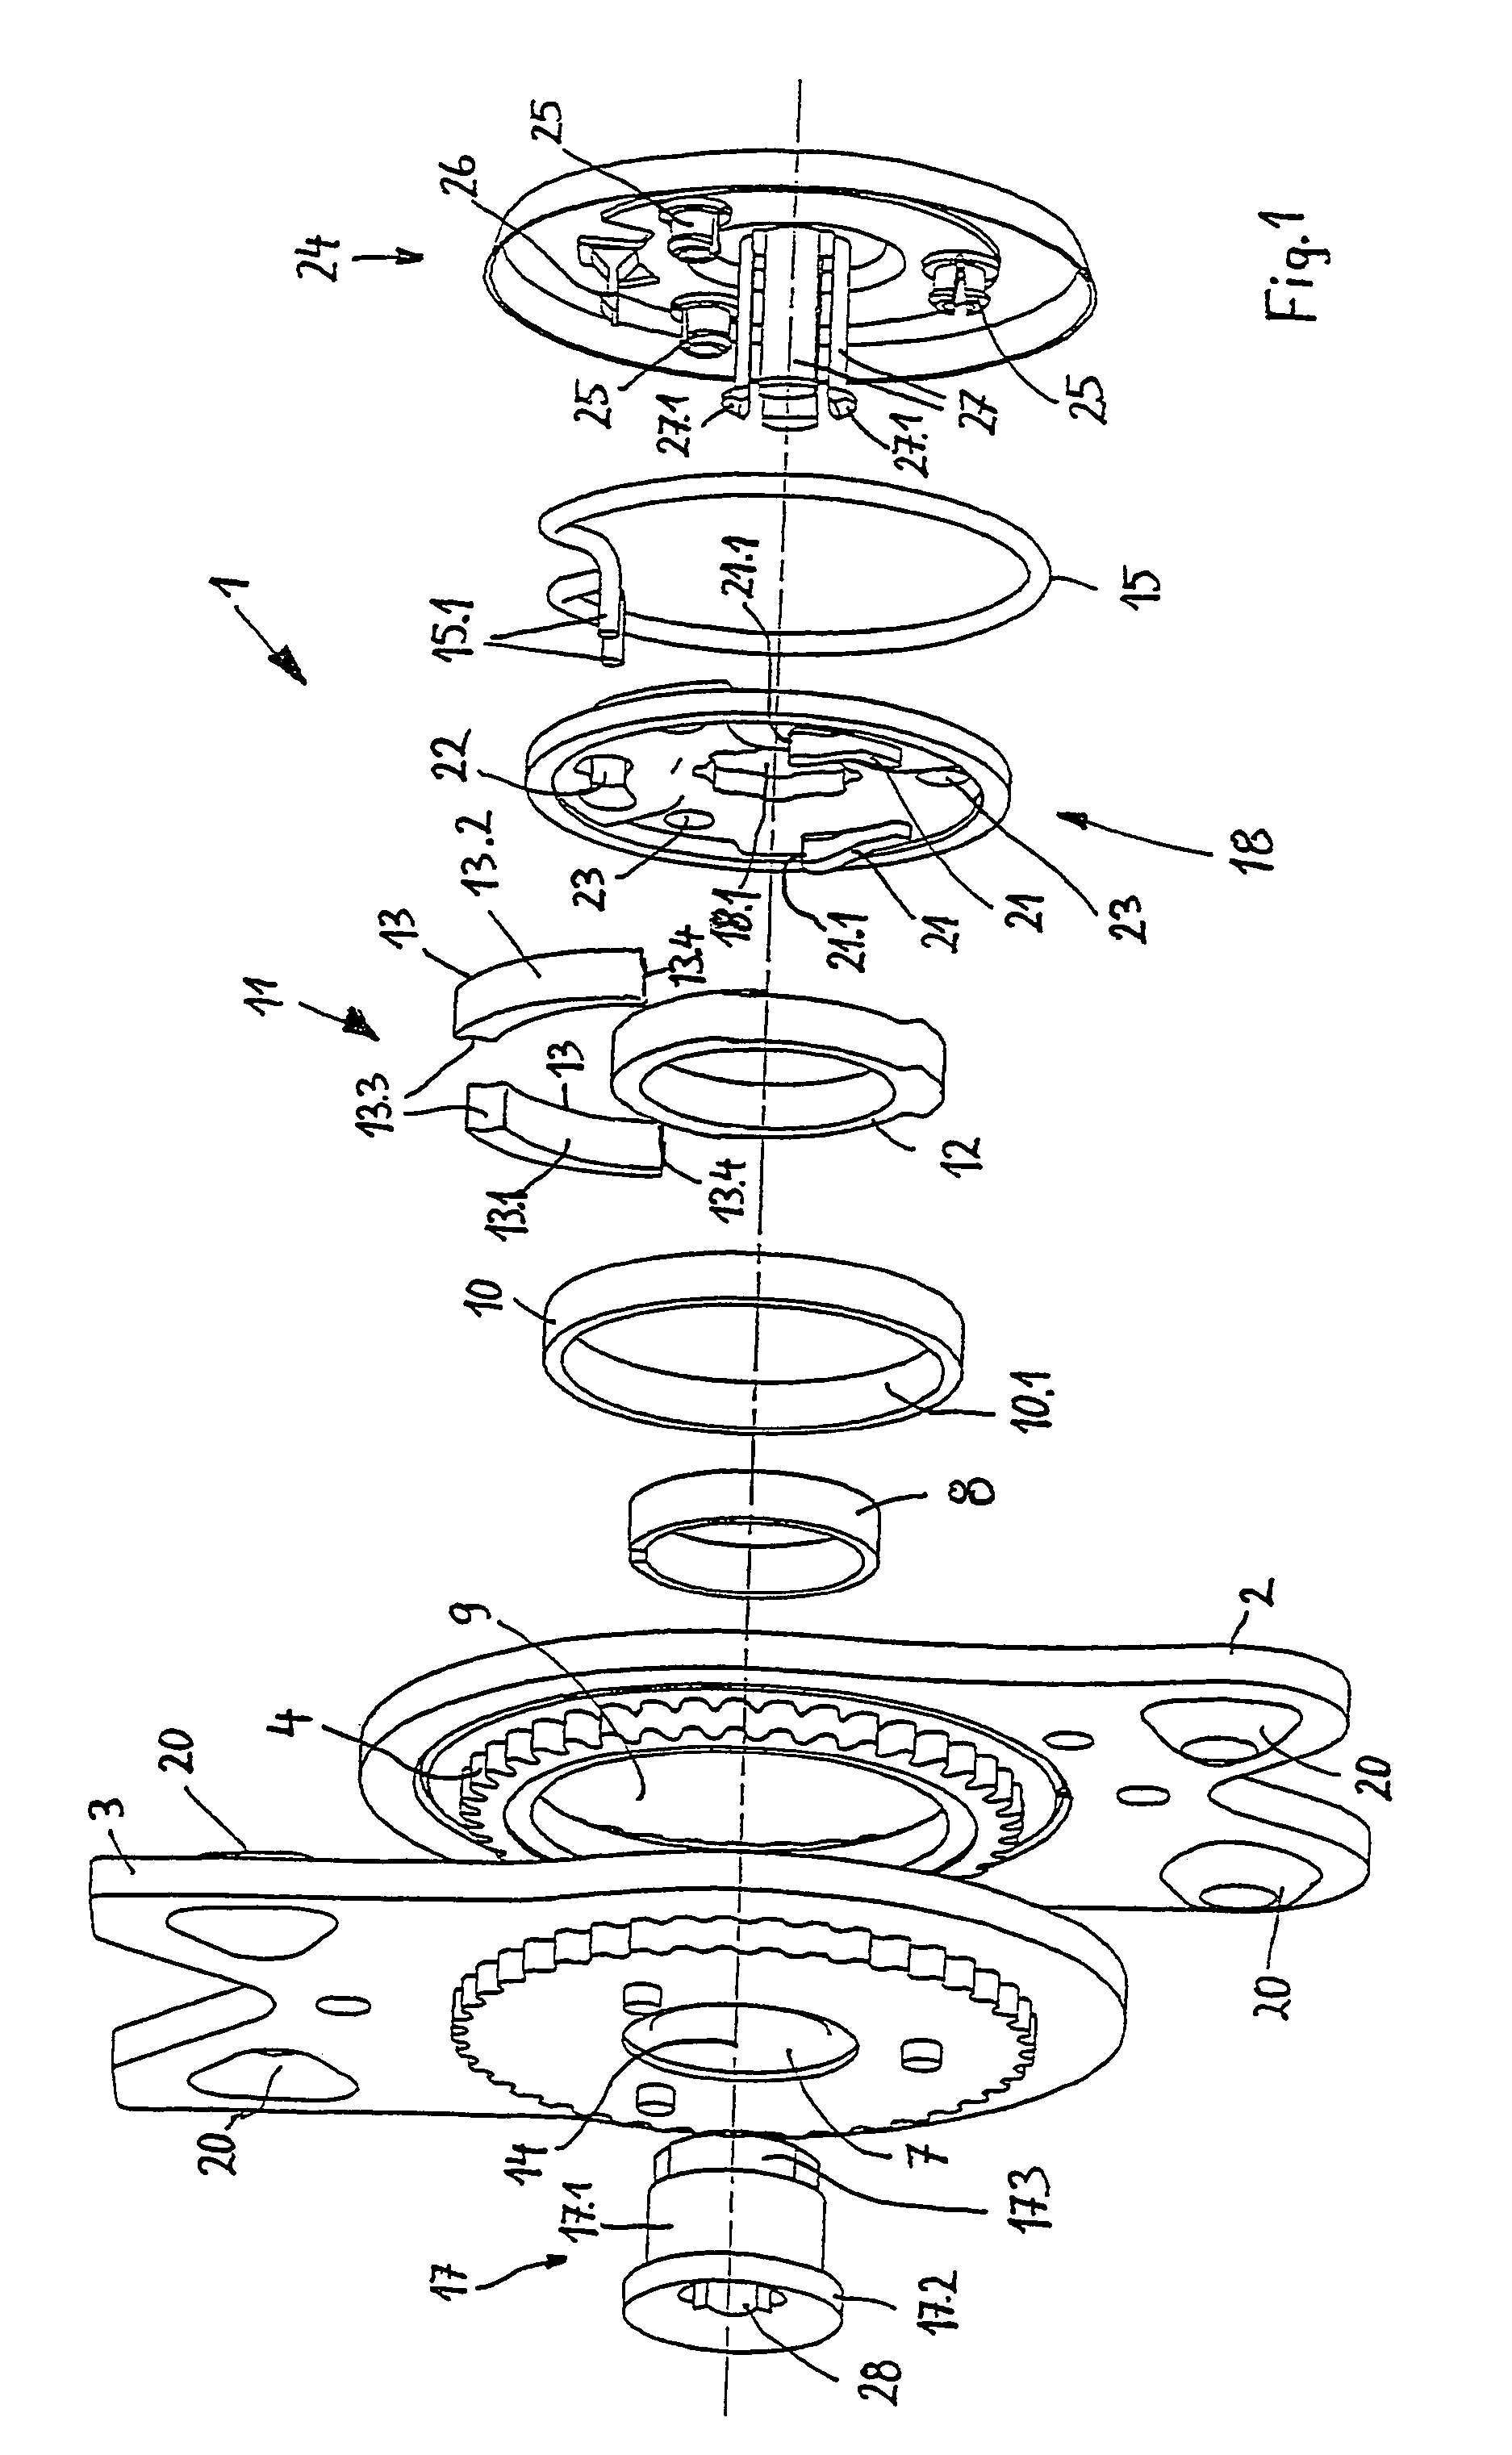 Device for adjustment of level of inclination of back part of motor vehicle seat